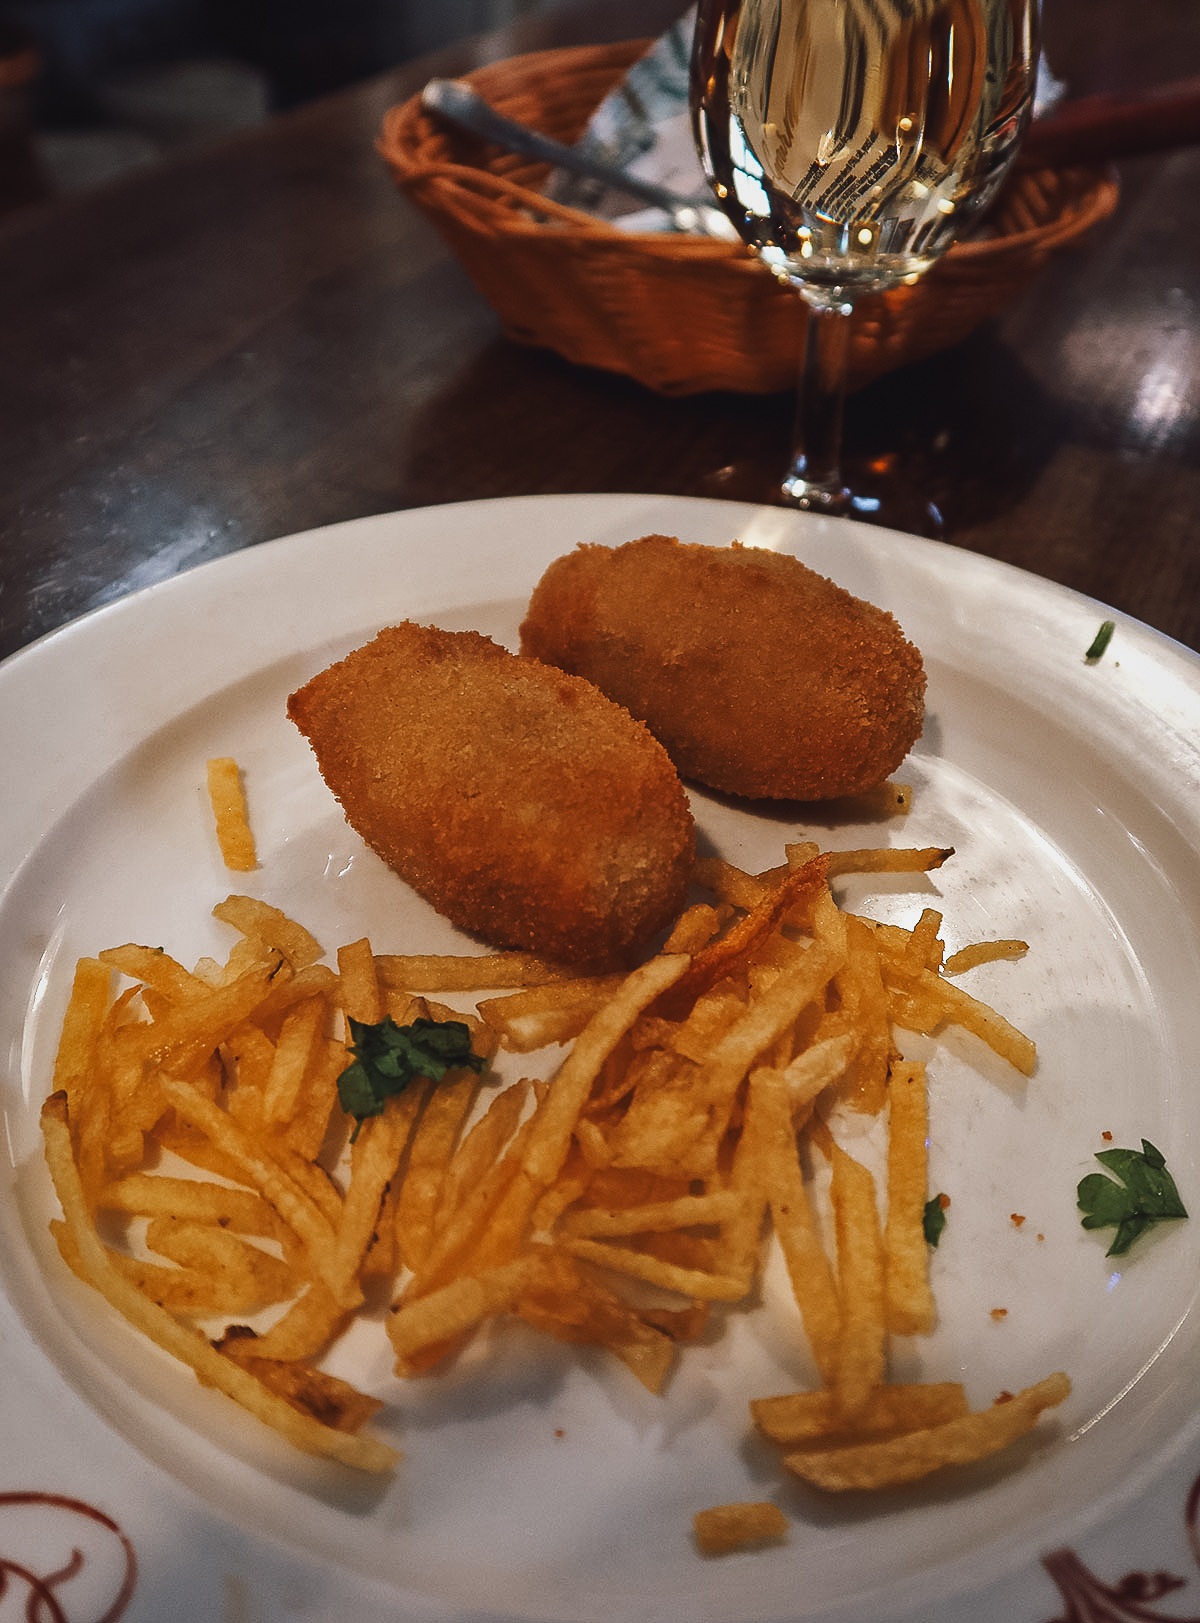 Croquettes at a restaurant in Seville